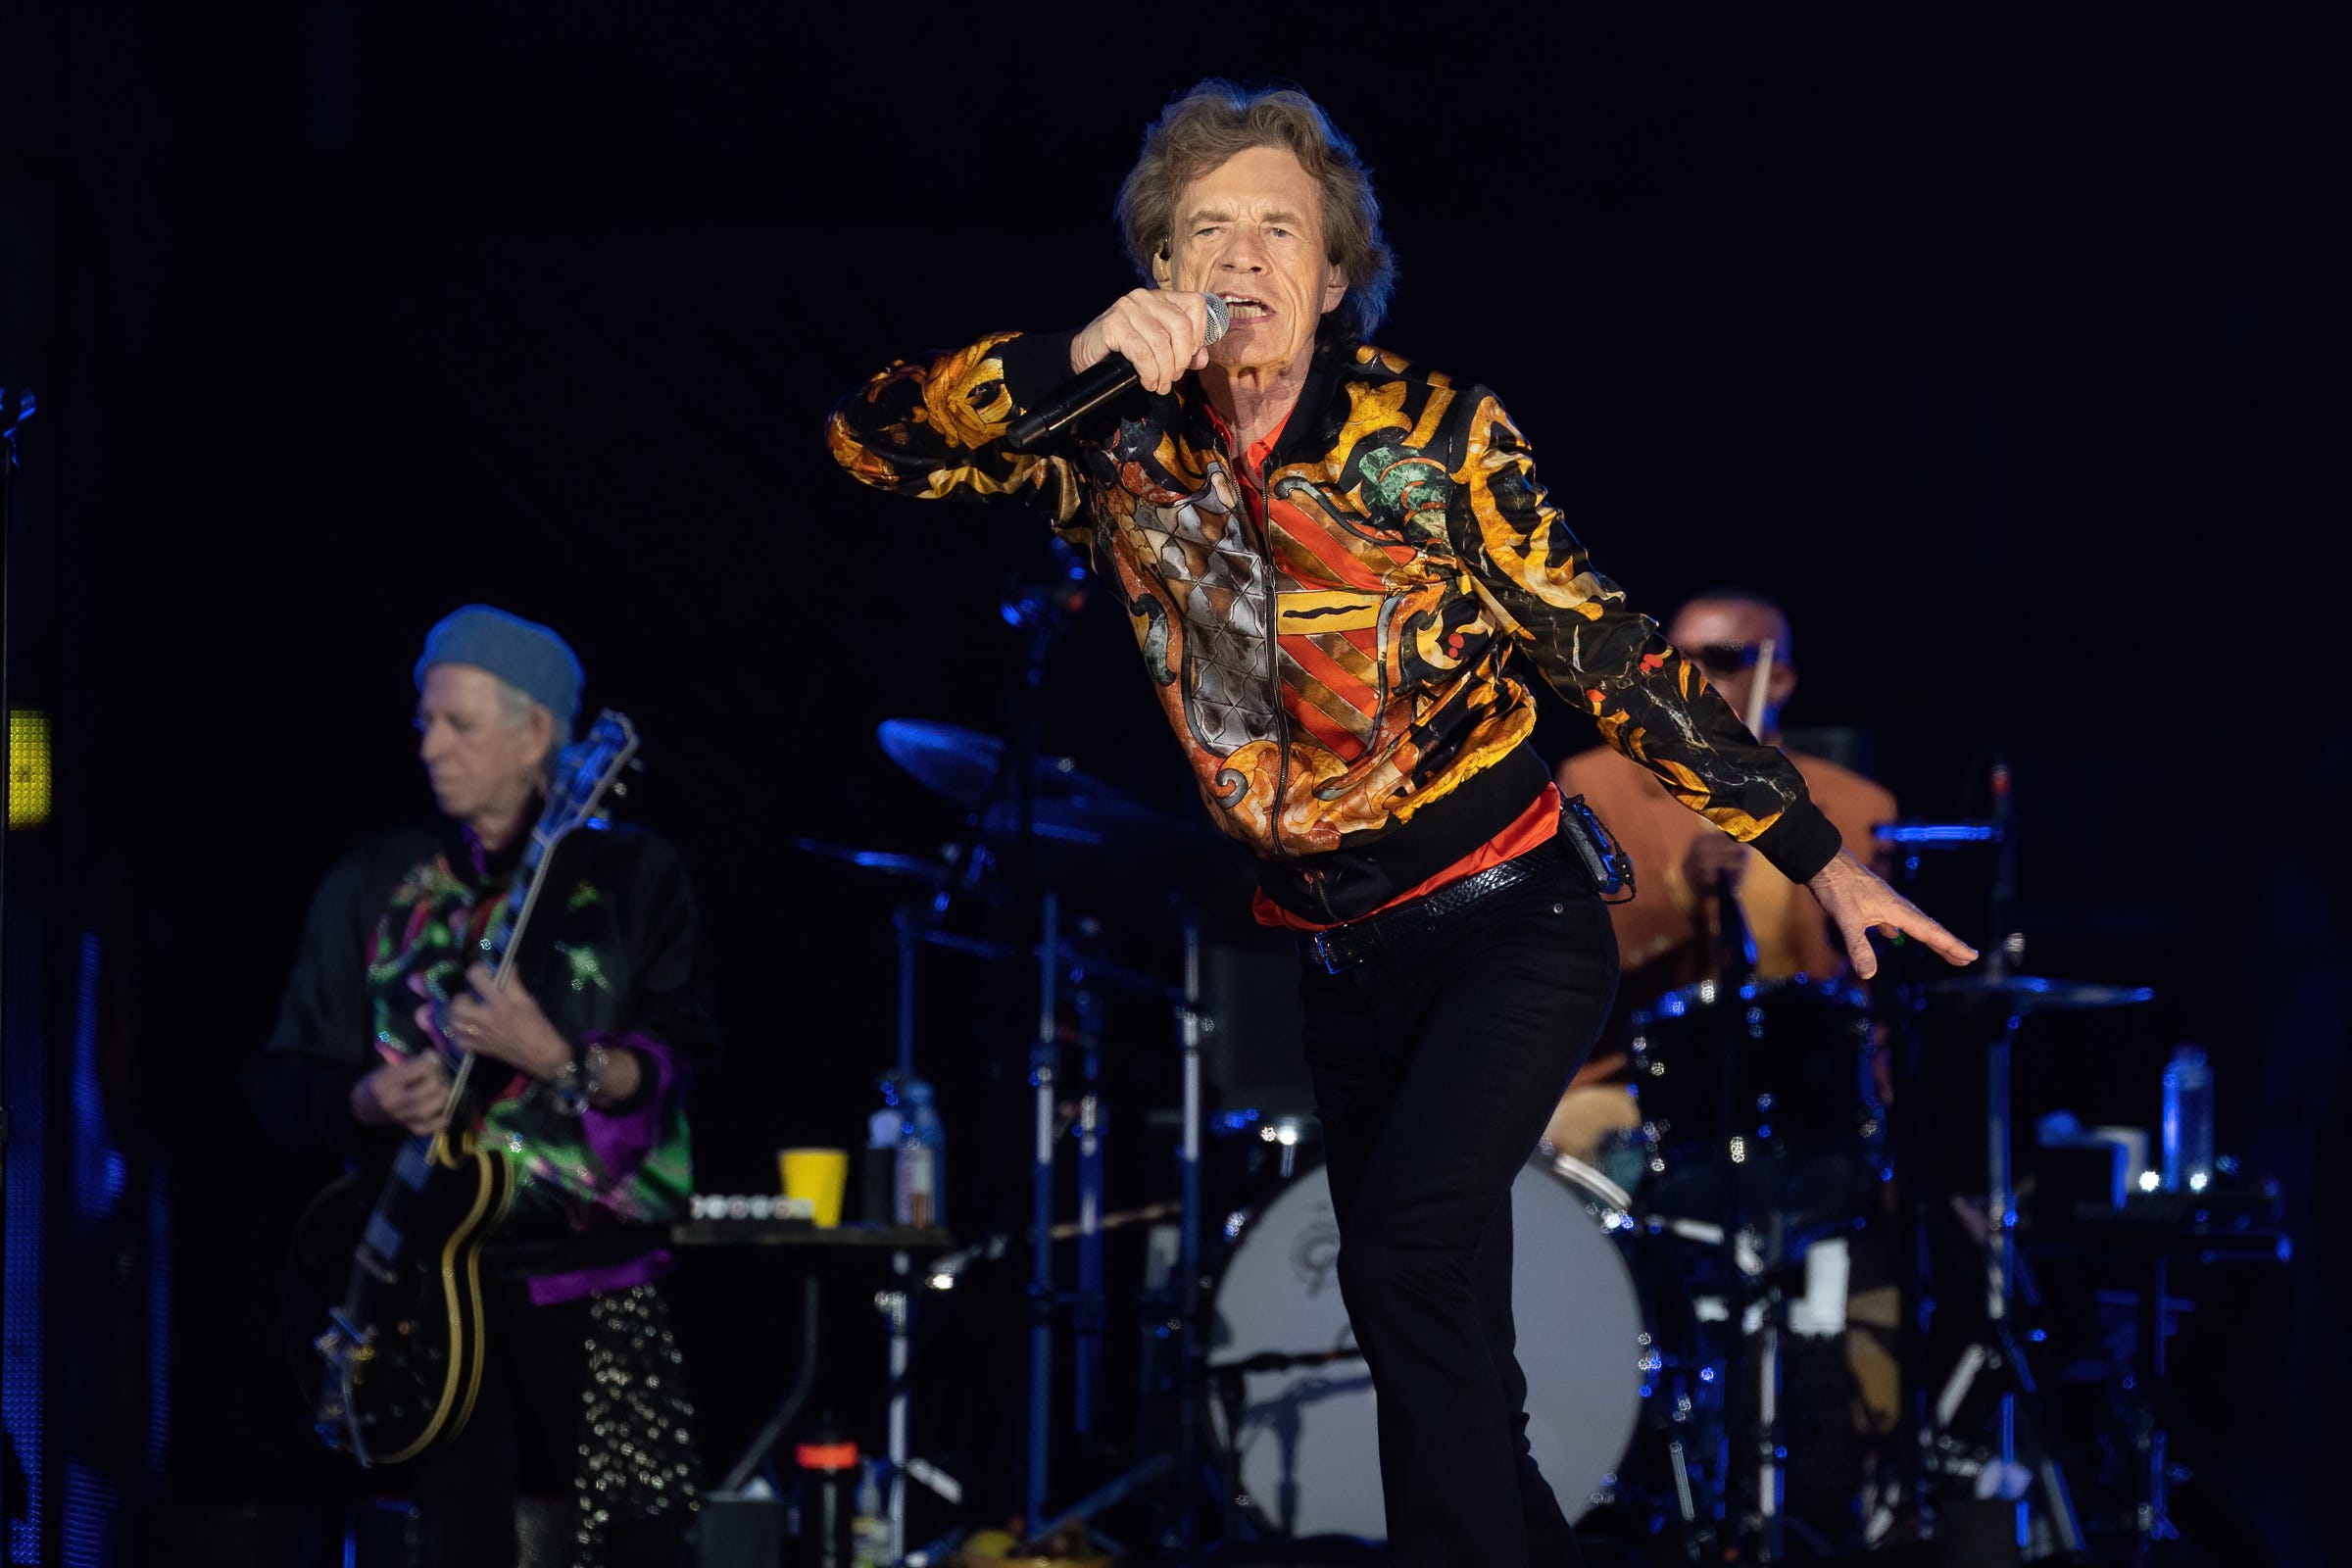 Keith Richards, Mick Jagger, and Steve Jordan of The Rolling Stones perform in support of their "No Filter Tour" at the Super Stage at Circuit of The Americas on November 20, 2021 in Austin, Texas.